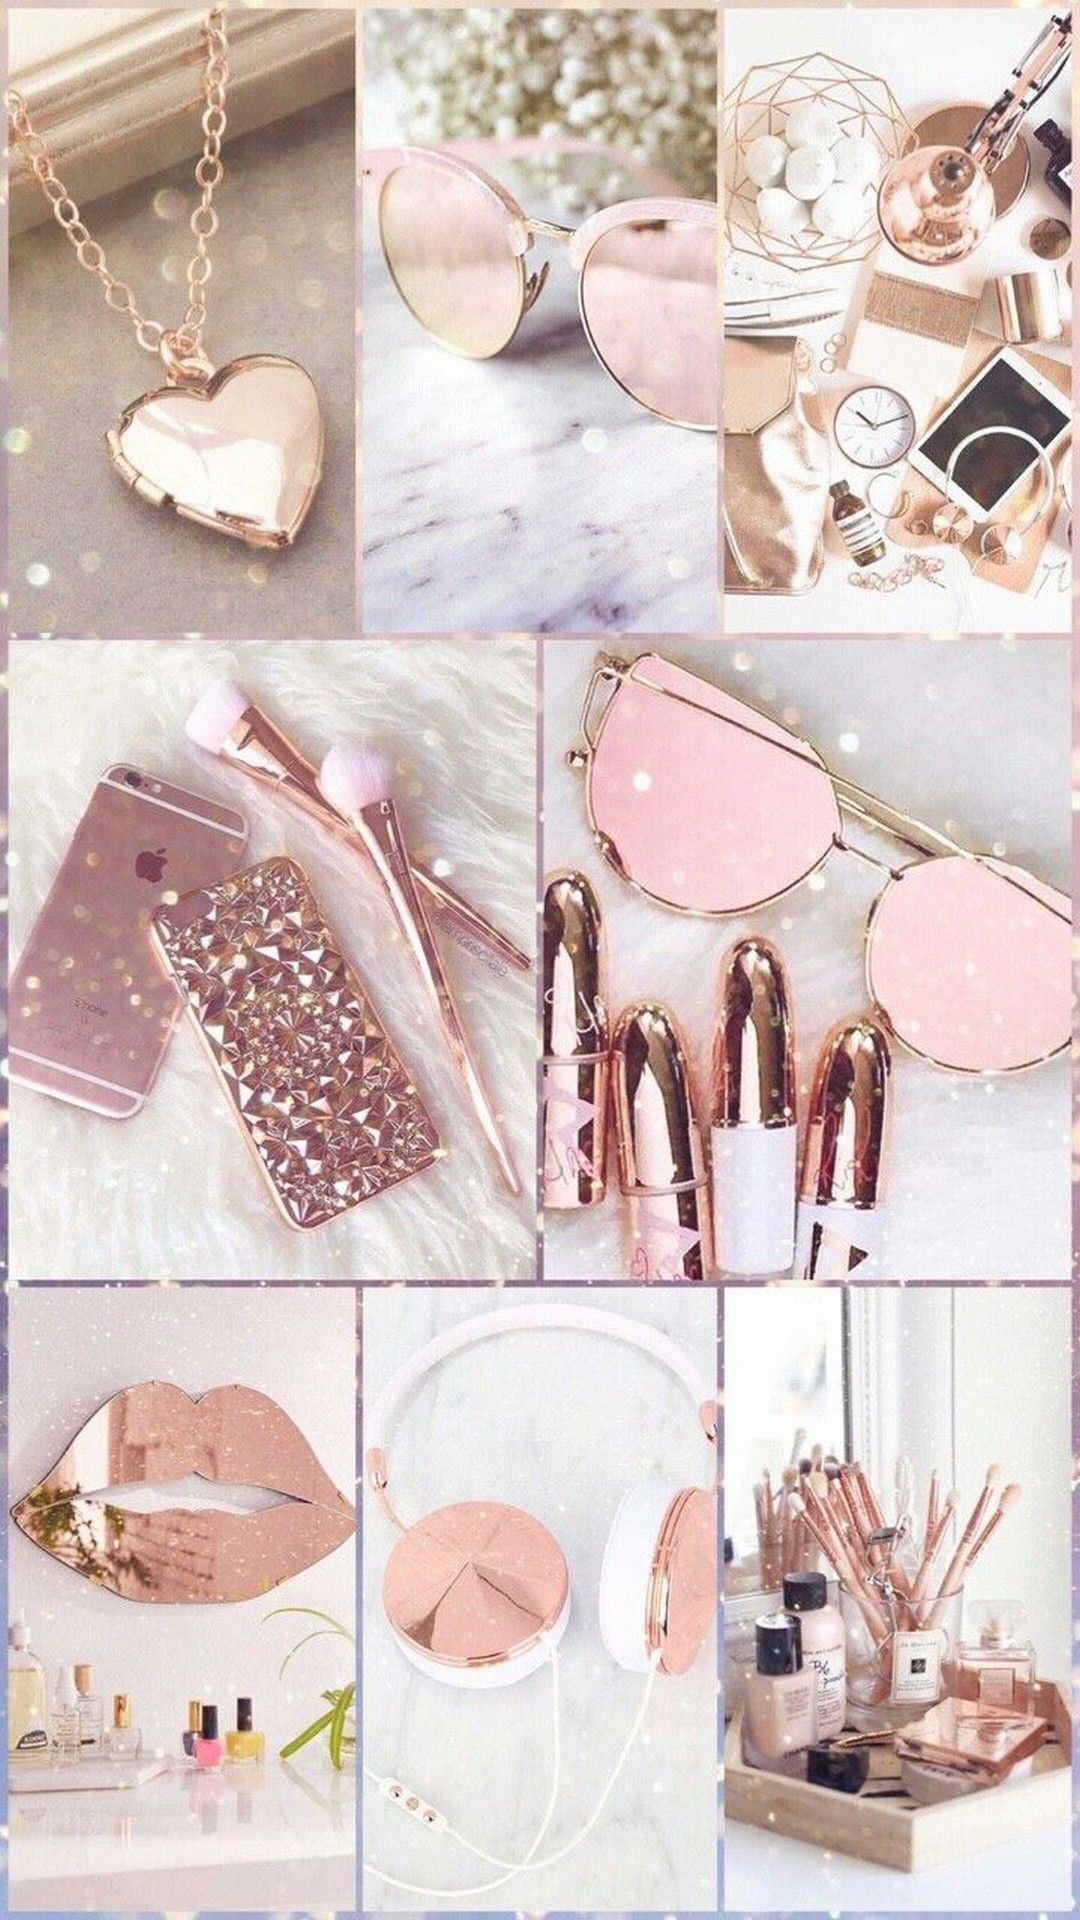 Aesthetic background collage of rose gold accessories, makeup, and office supplies. - Rose gold